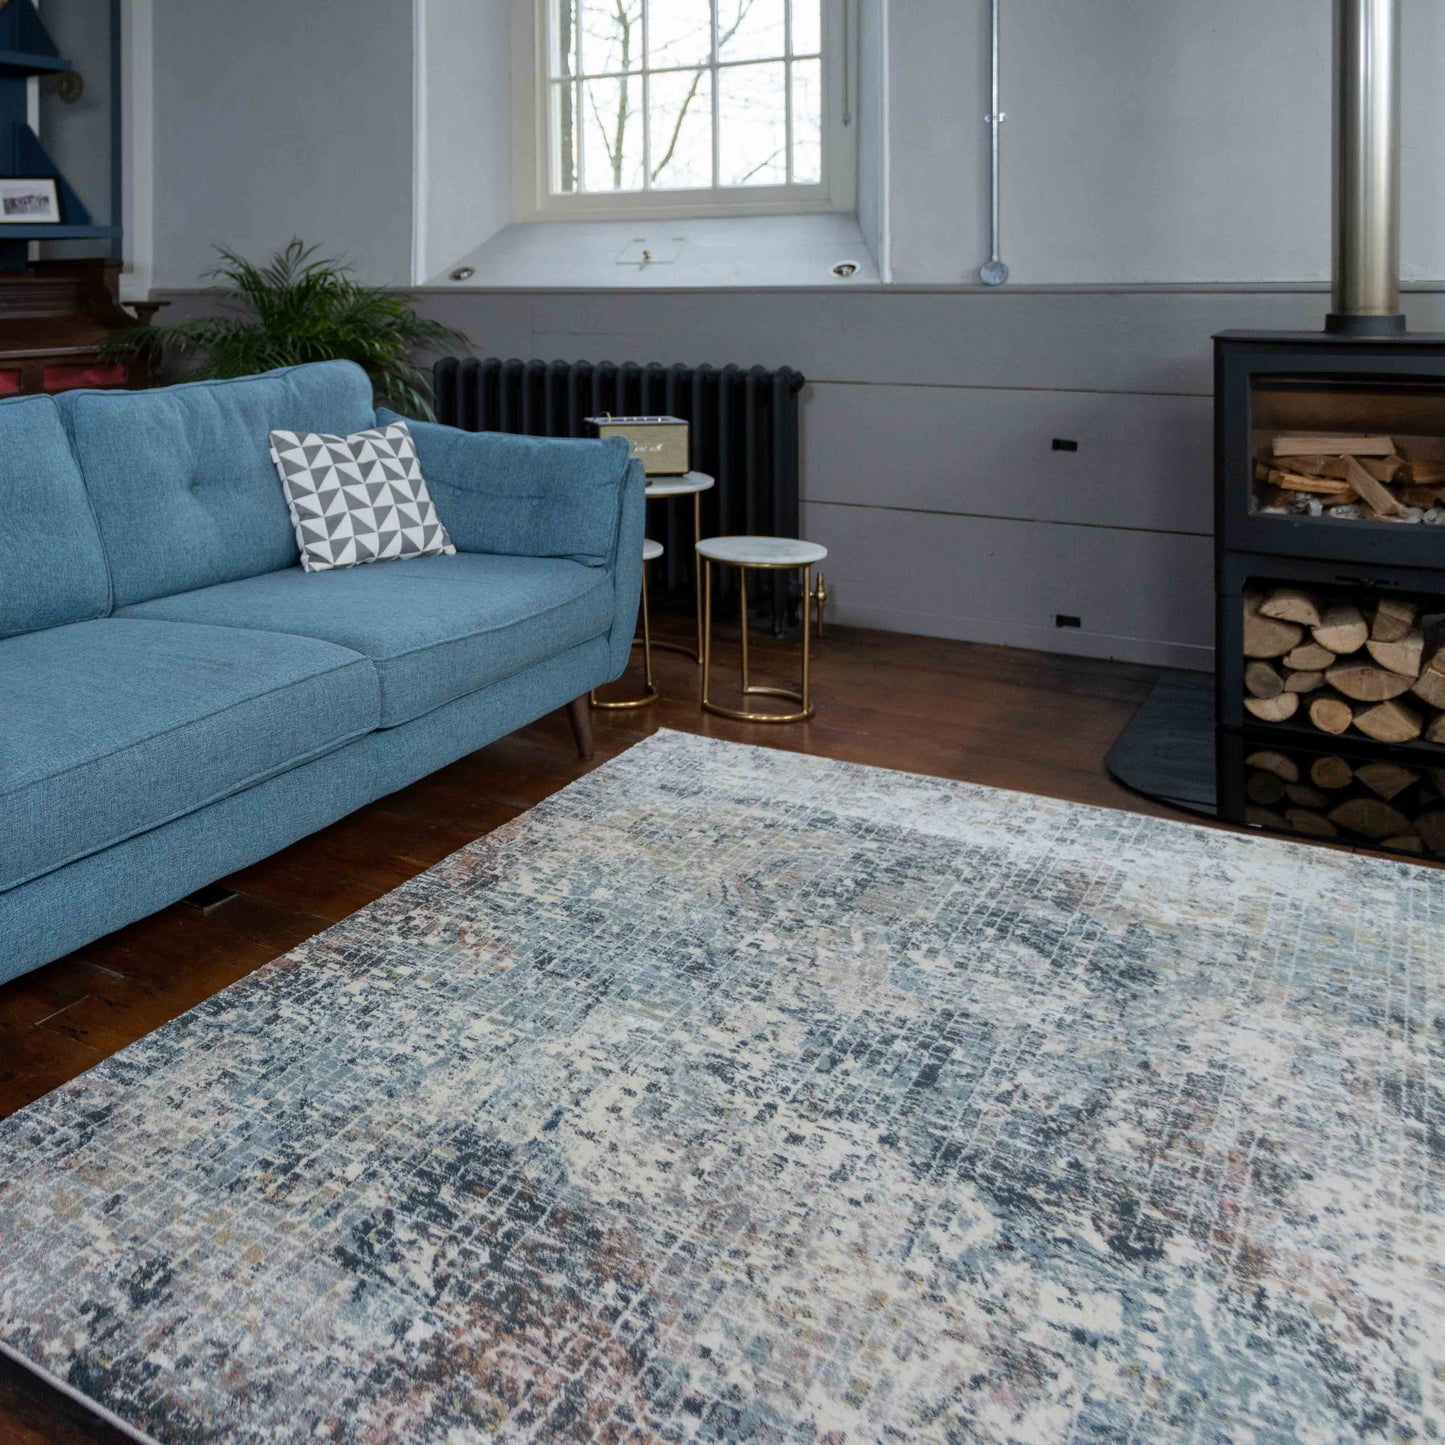 Soft Modern Blue Distressed Abstract Bedroom Rugs - Minuet